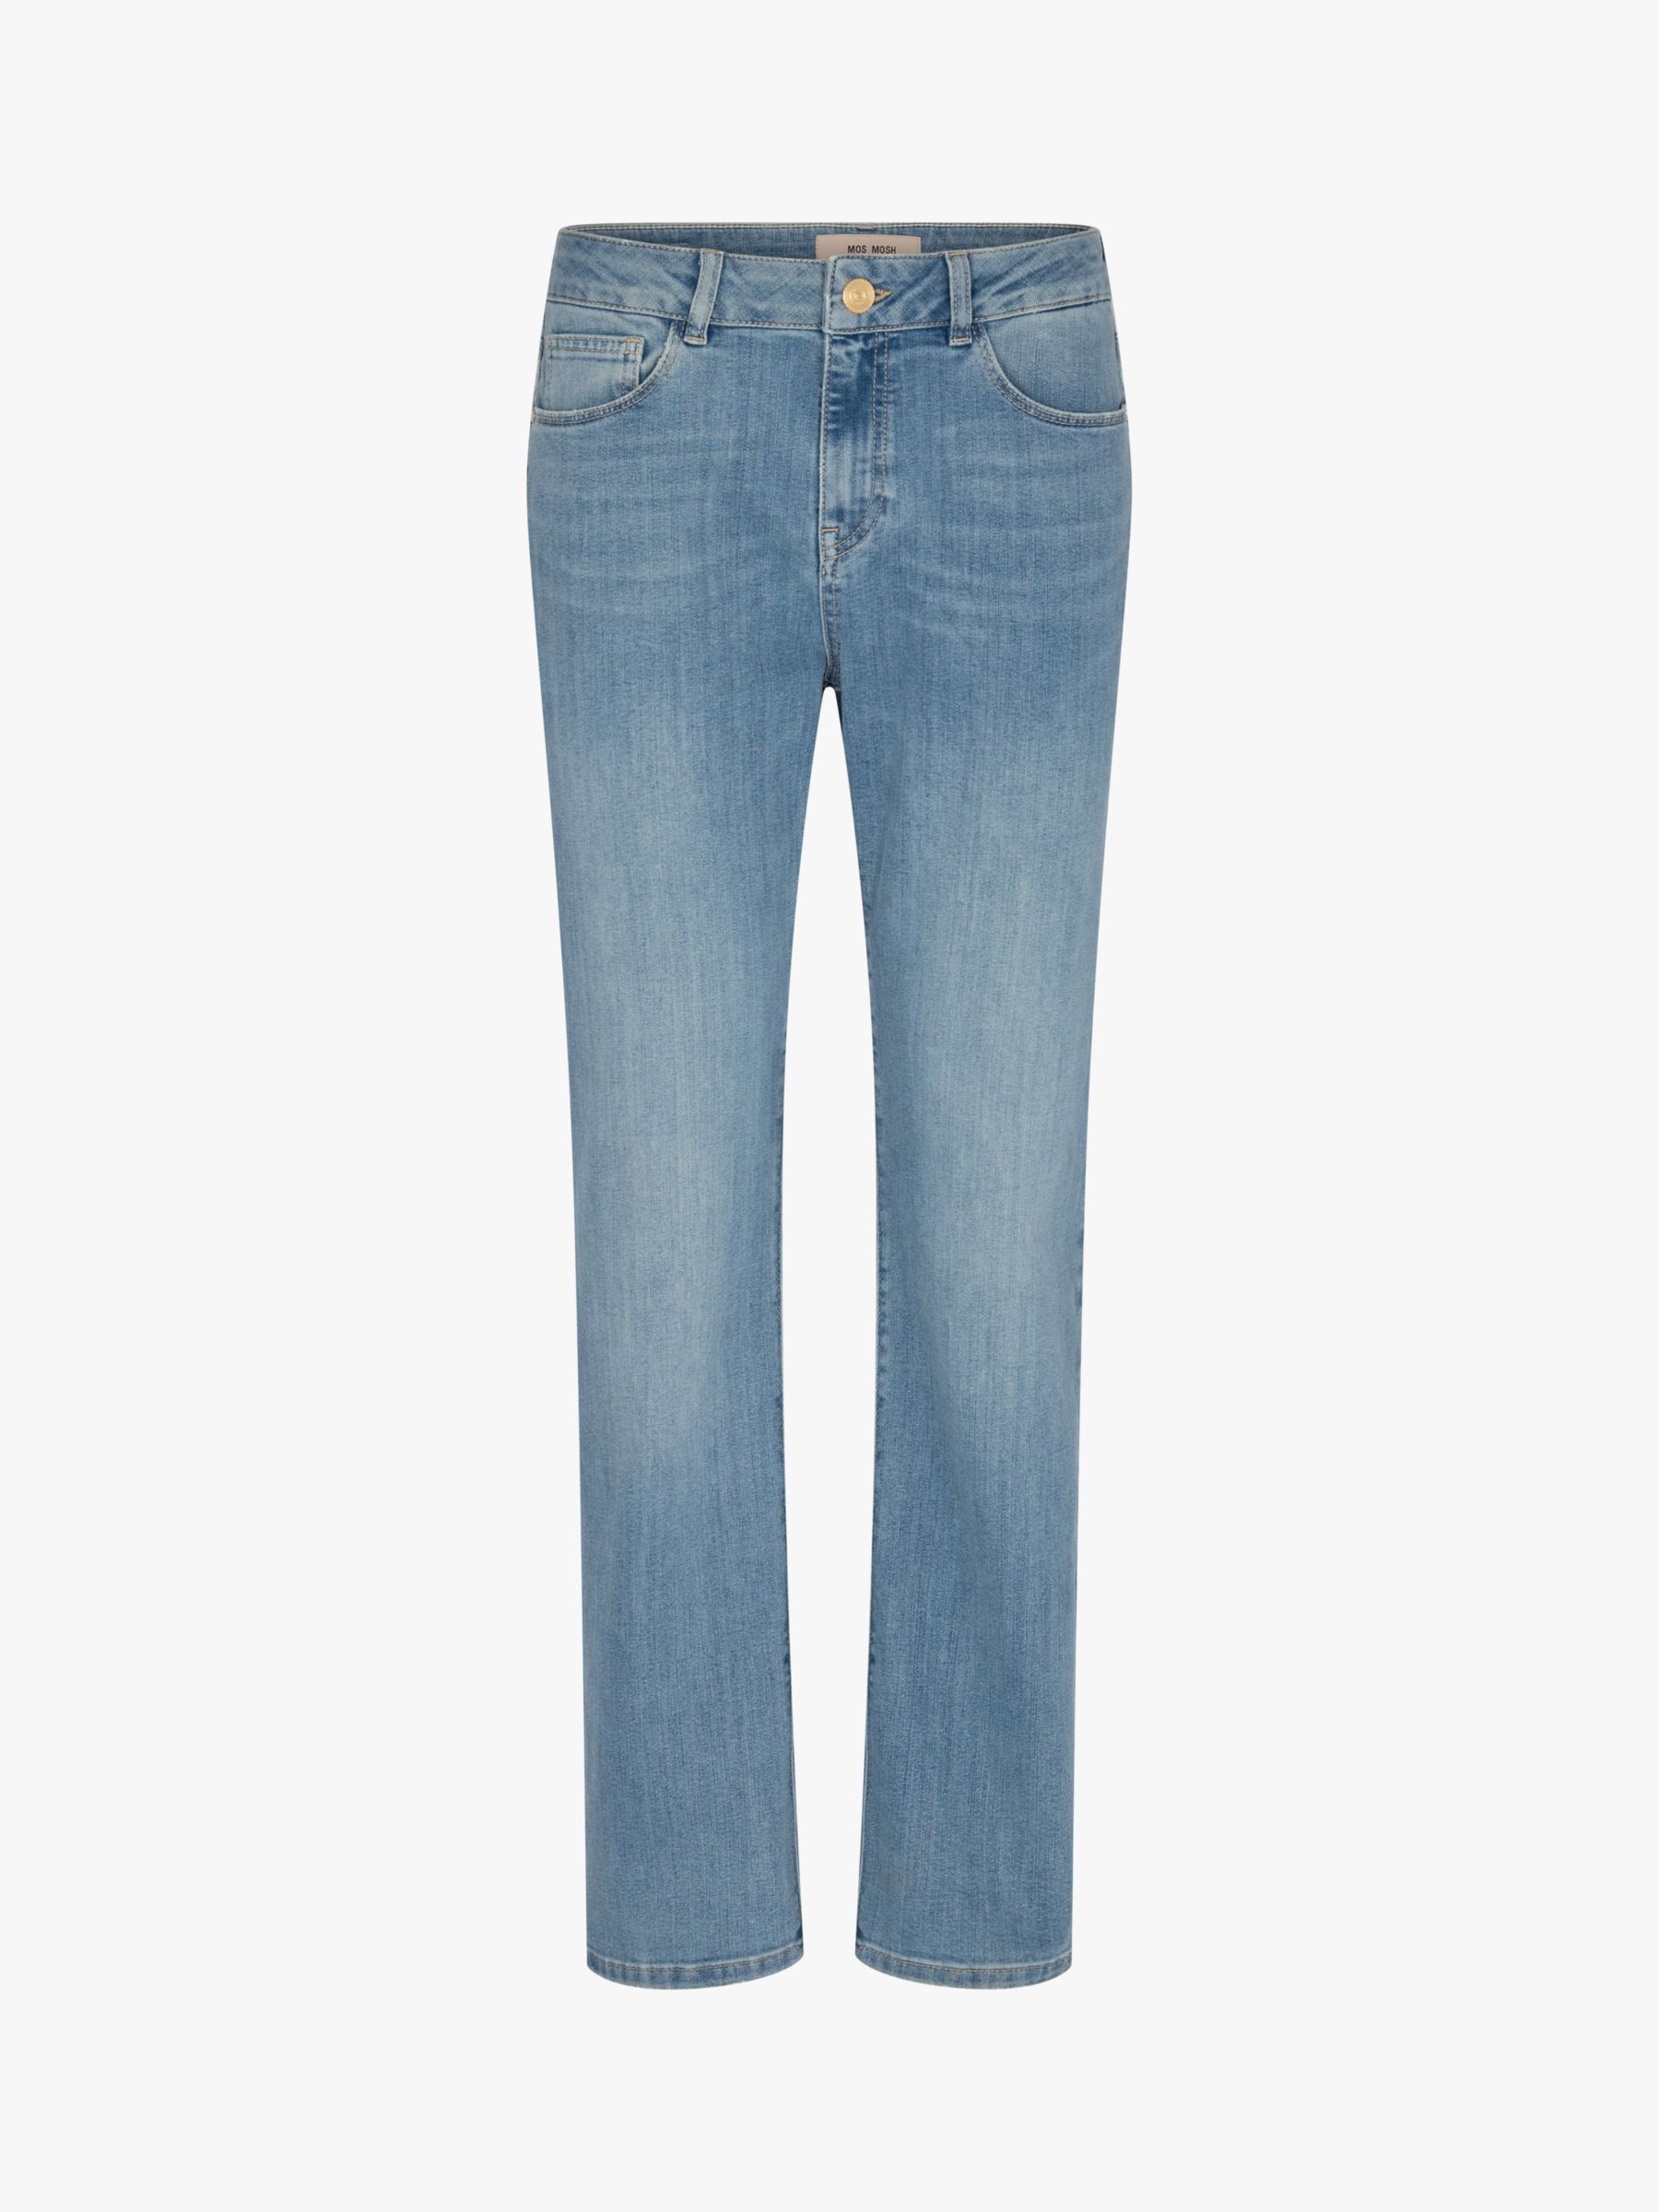 MOS MOSH Cecilia Reloved Flared Jeans, Light Blue at John Lewis & Partners